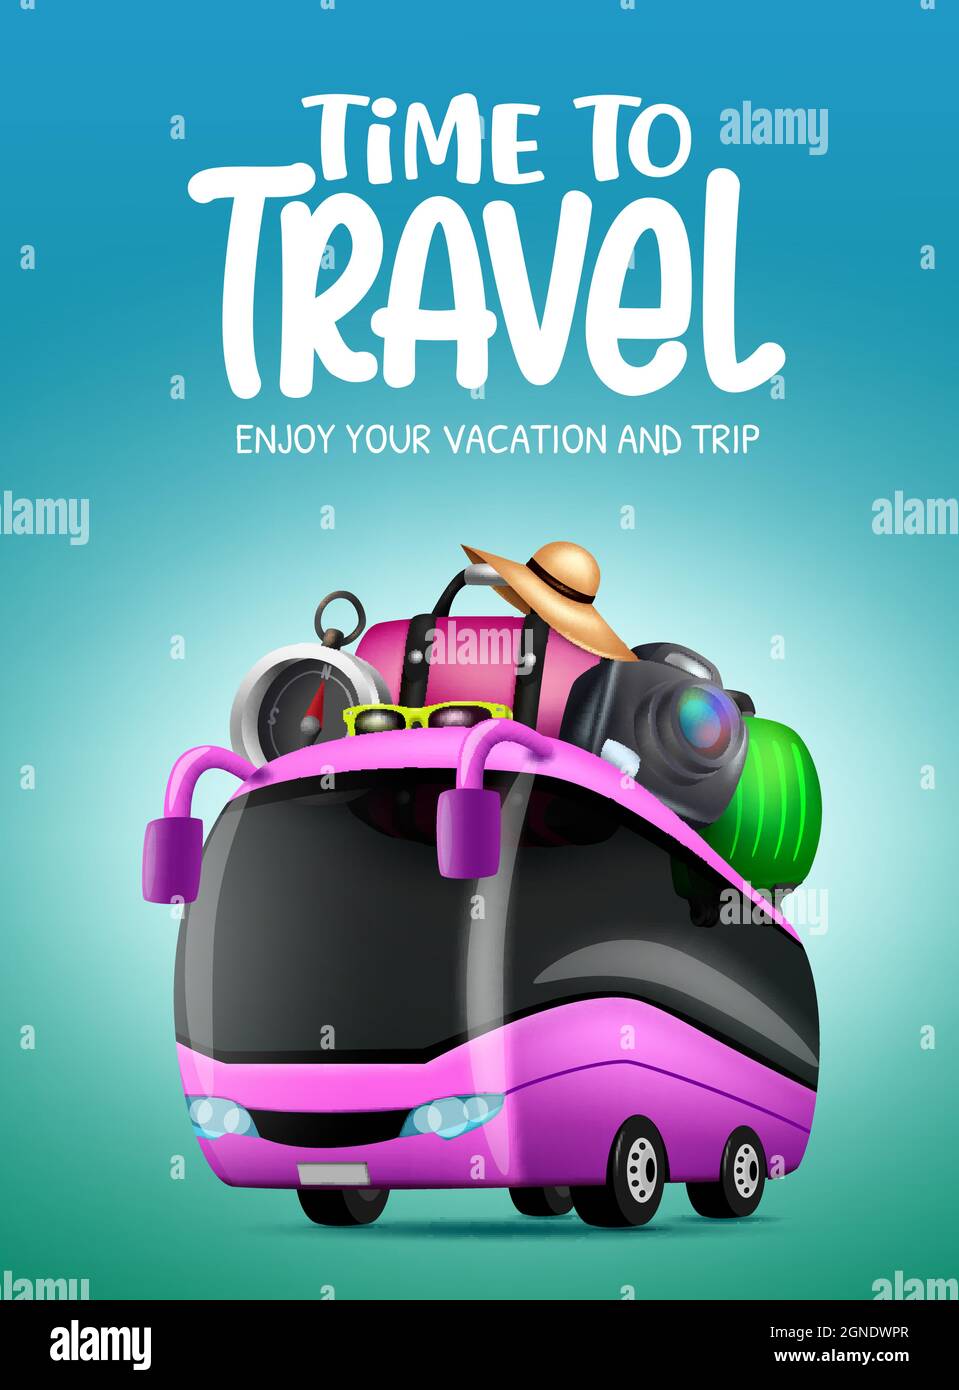 Travel time vector design. Time to travel text with bus transportation  vehicle, luggage bag and compass tour elements for fun and enjoy vacation  trip Stock Vector Image & Art - Alamy